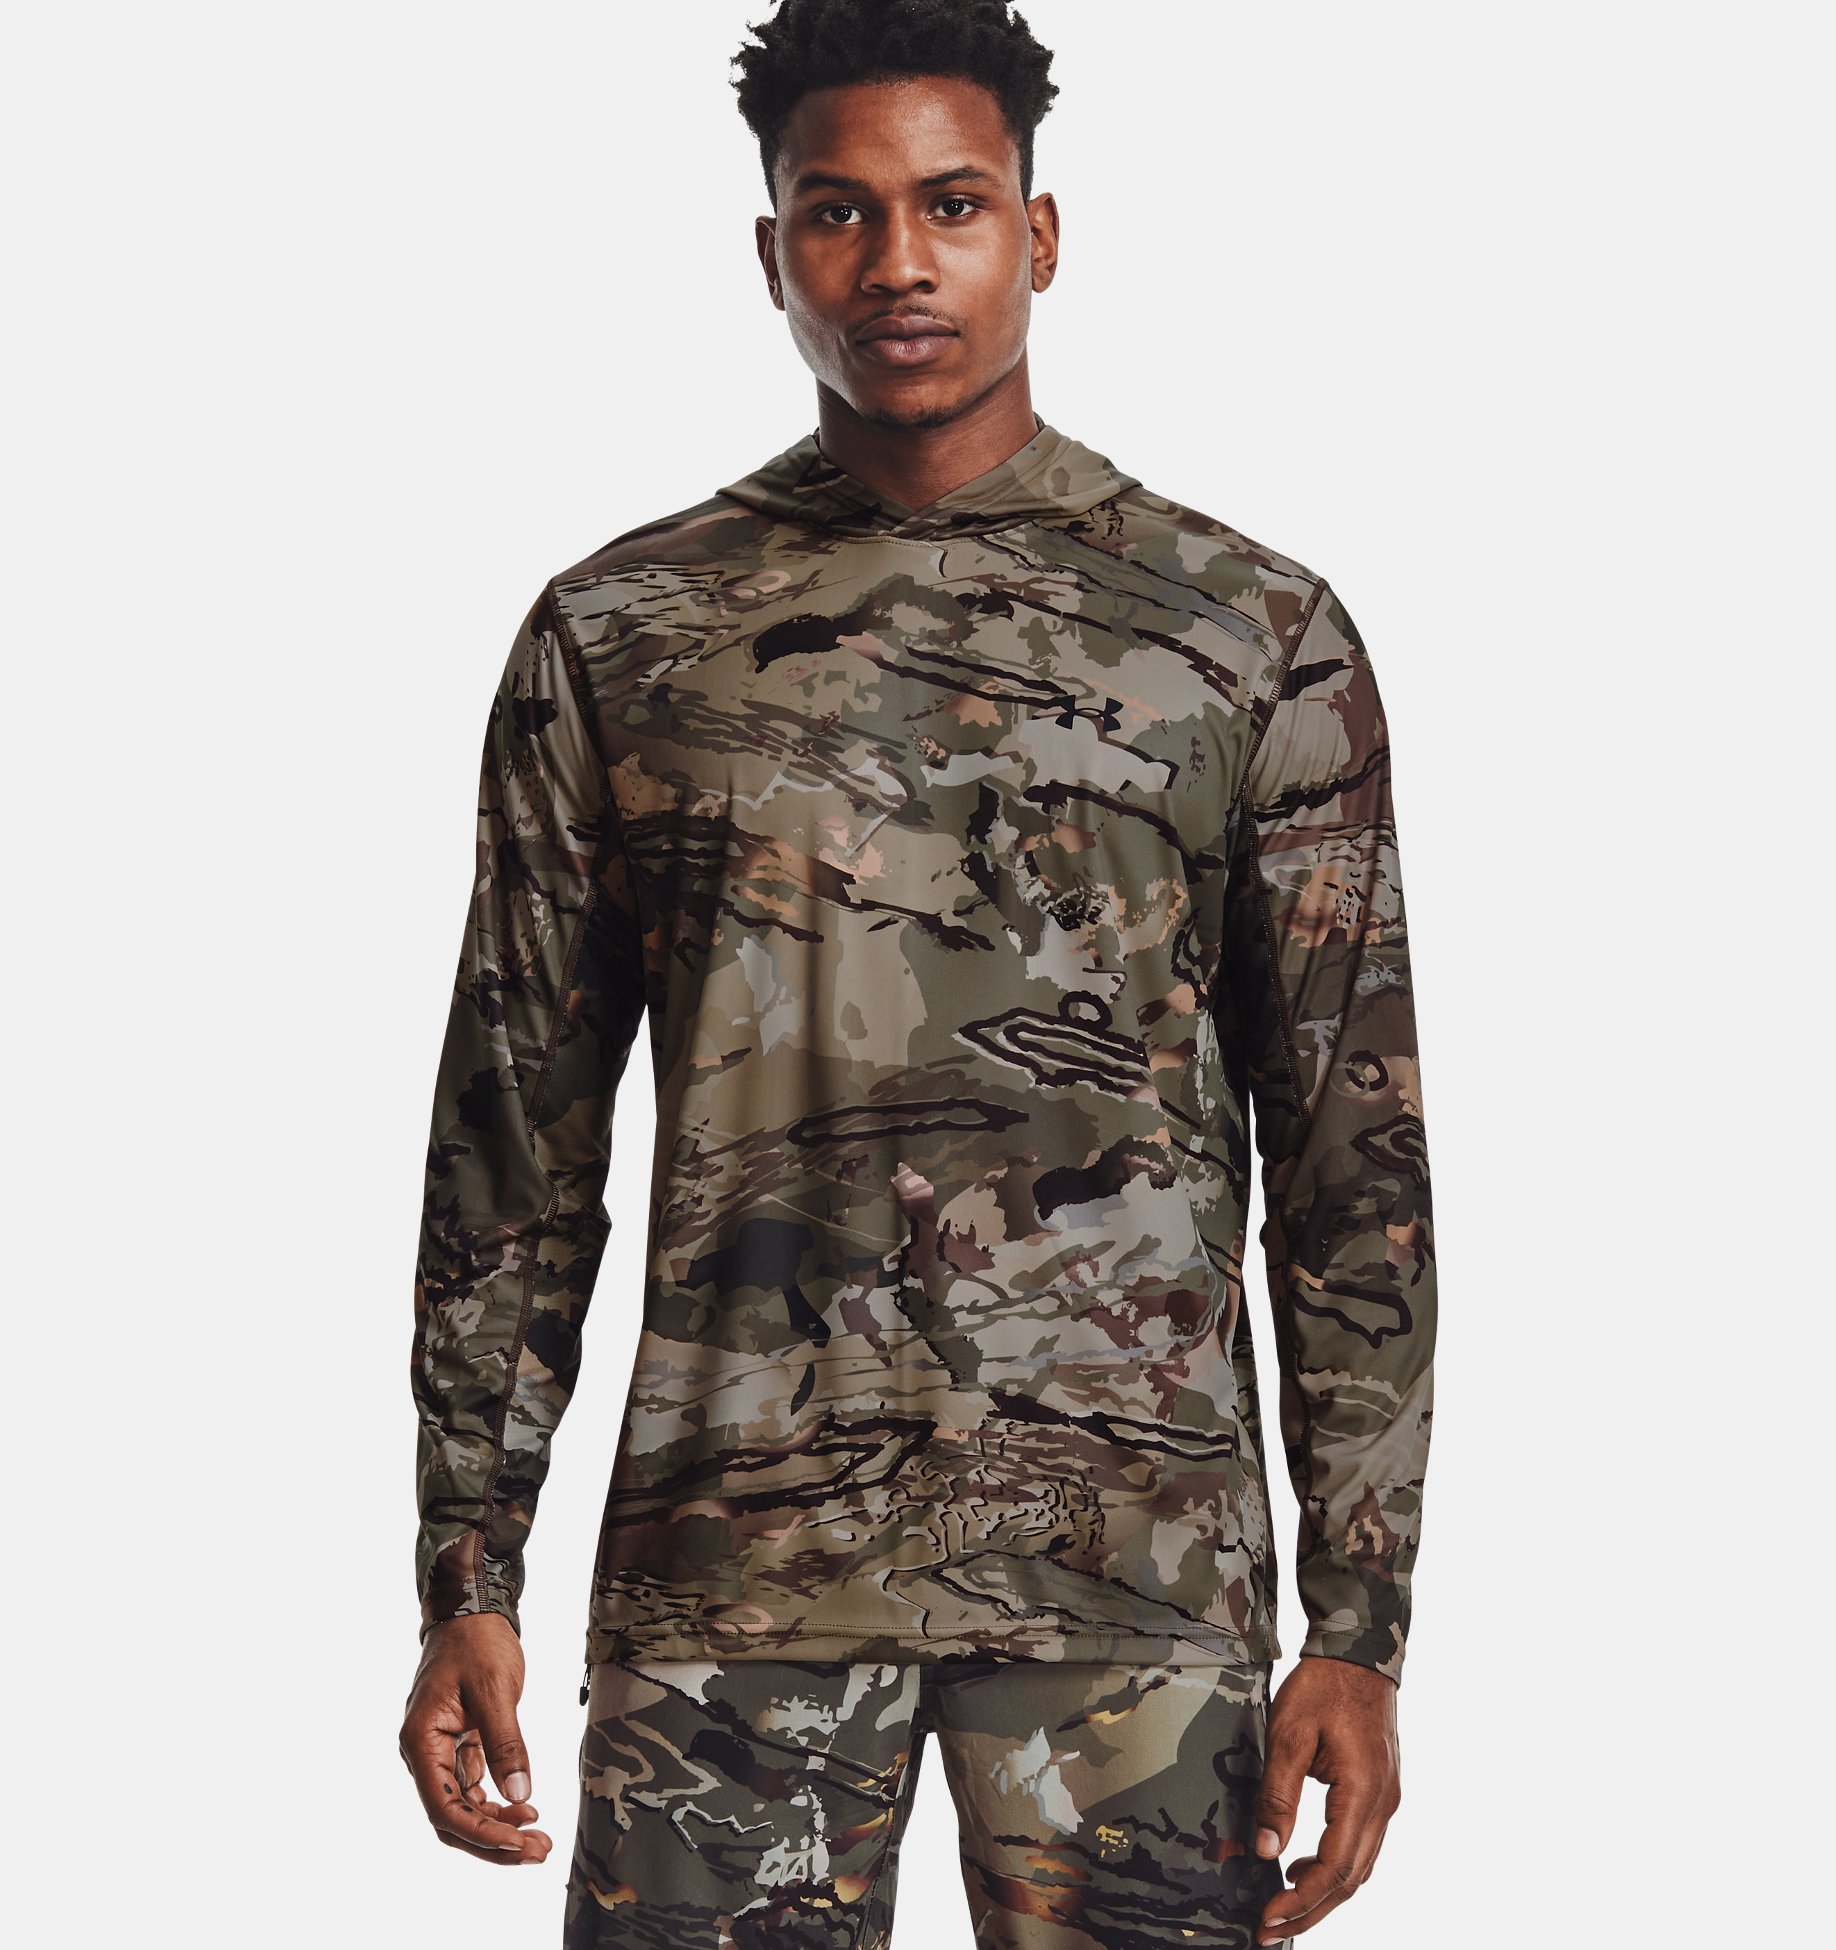 Under Armour Mid Season Reversible Wool Base Crew Forest Camo Shirt 2XL $100 